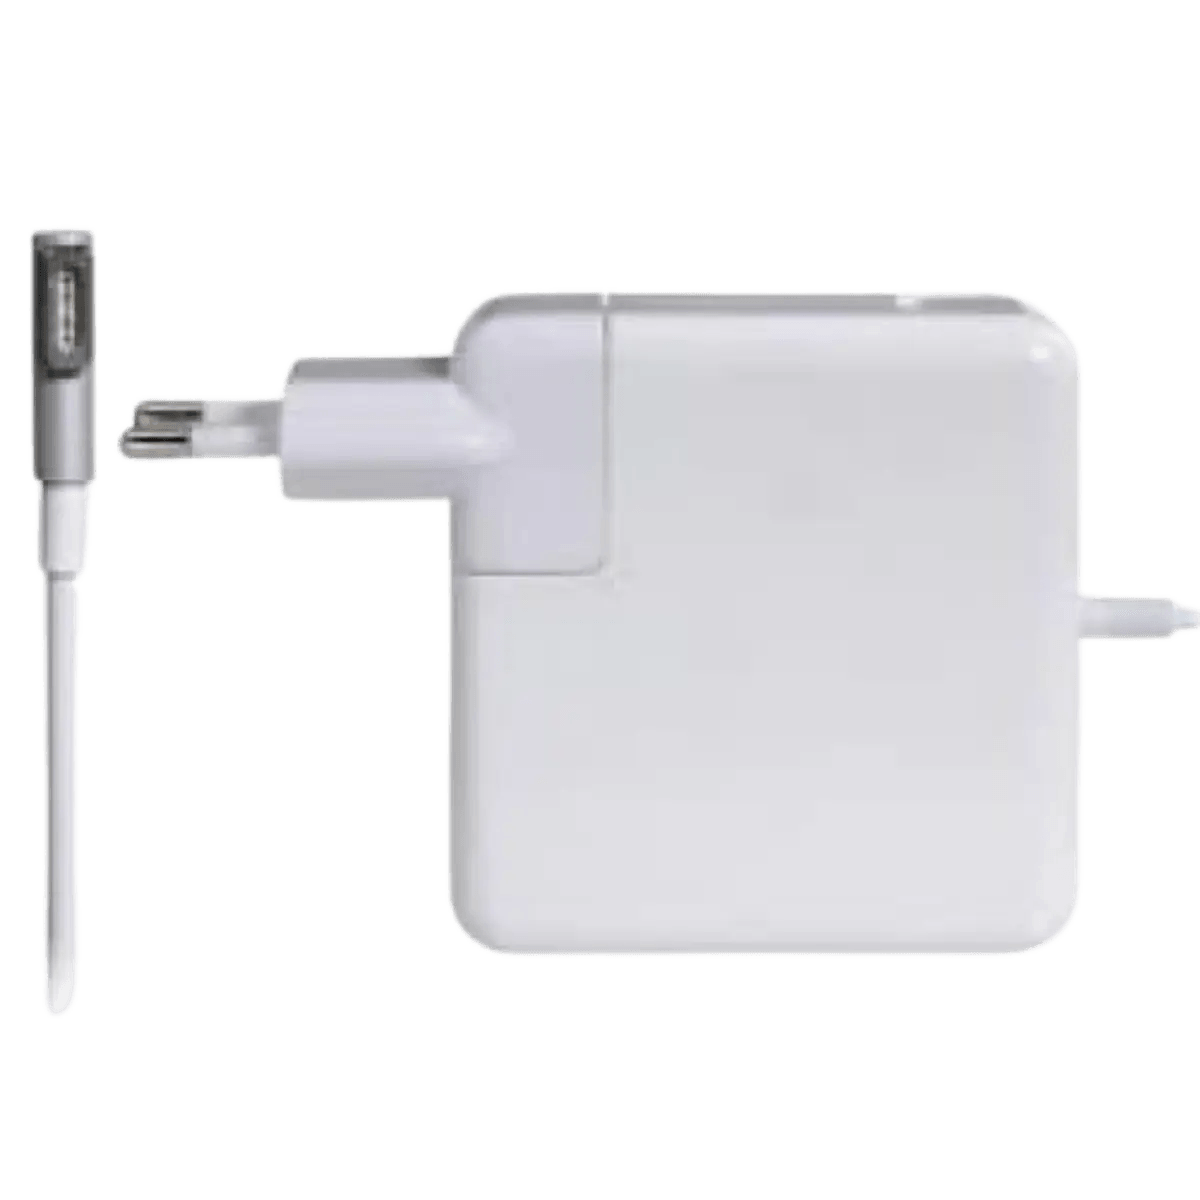 Chargeur alimentation Macbook Pro Macbook Air Magsafe 2 60W Type T